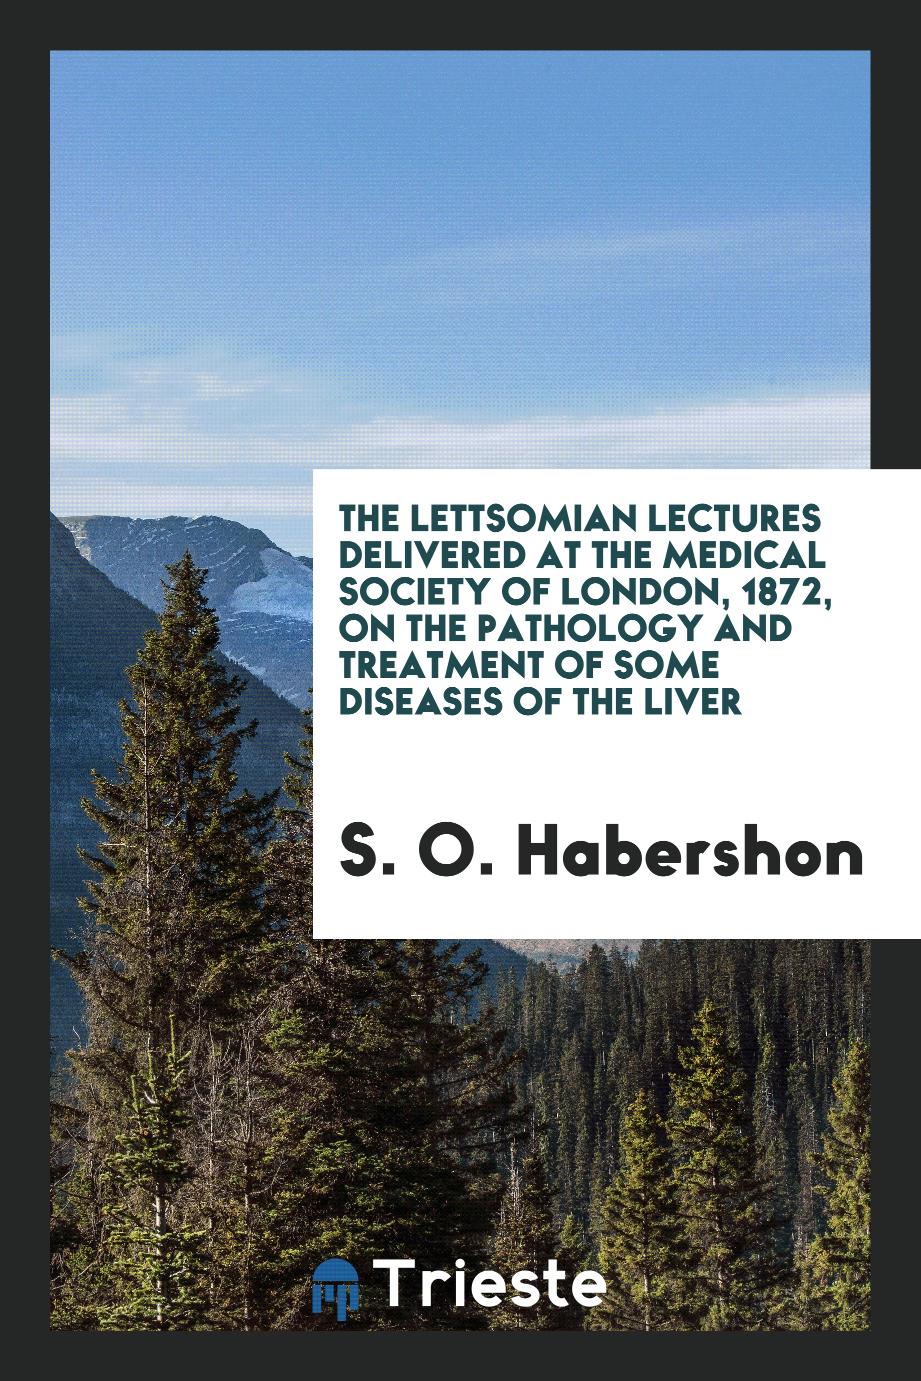 The Lettsomian Lectures Delivered at the Medical Society of London, 1872, on the Pathology and Treatment of Some Diseases of the Liver